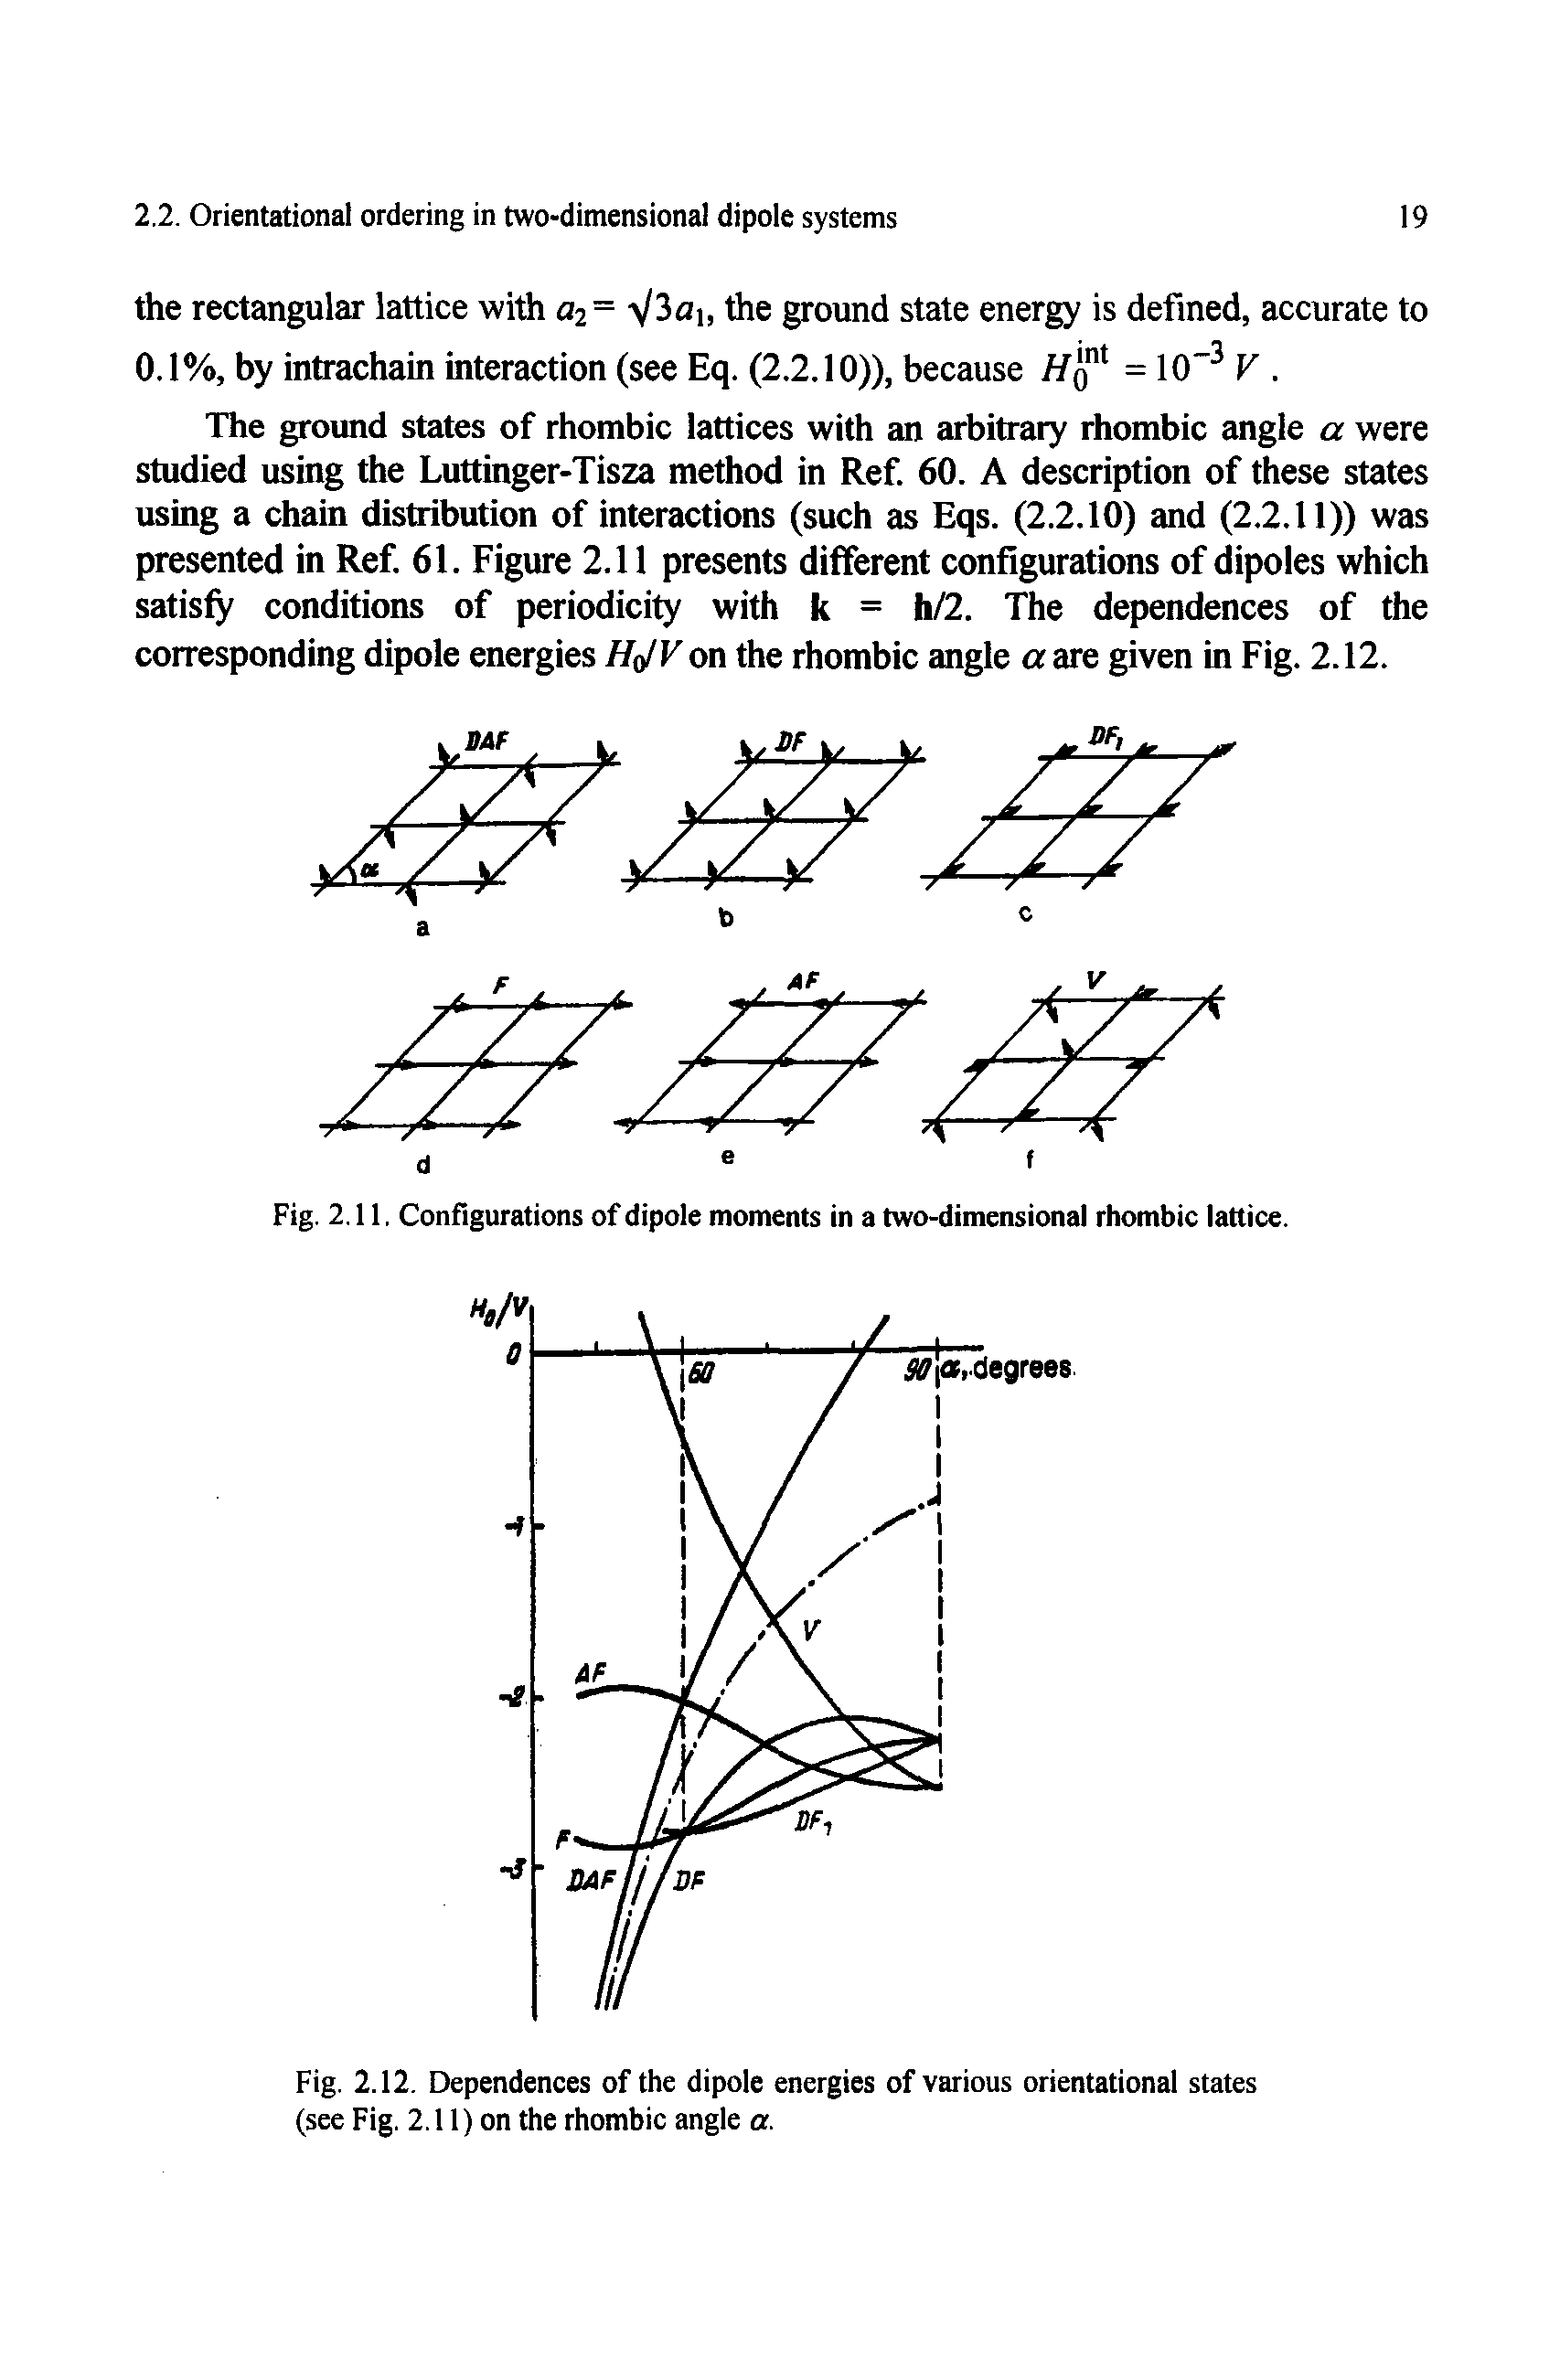 Fig. 2.12. Dependences of the dipole energies of various orientational states (see Fig. 2.11) on the rhombic angle a.